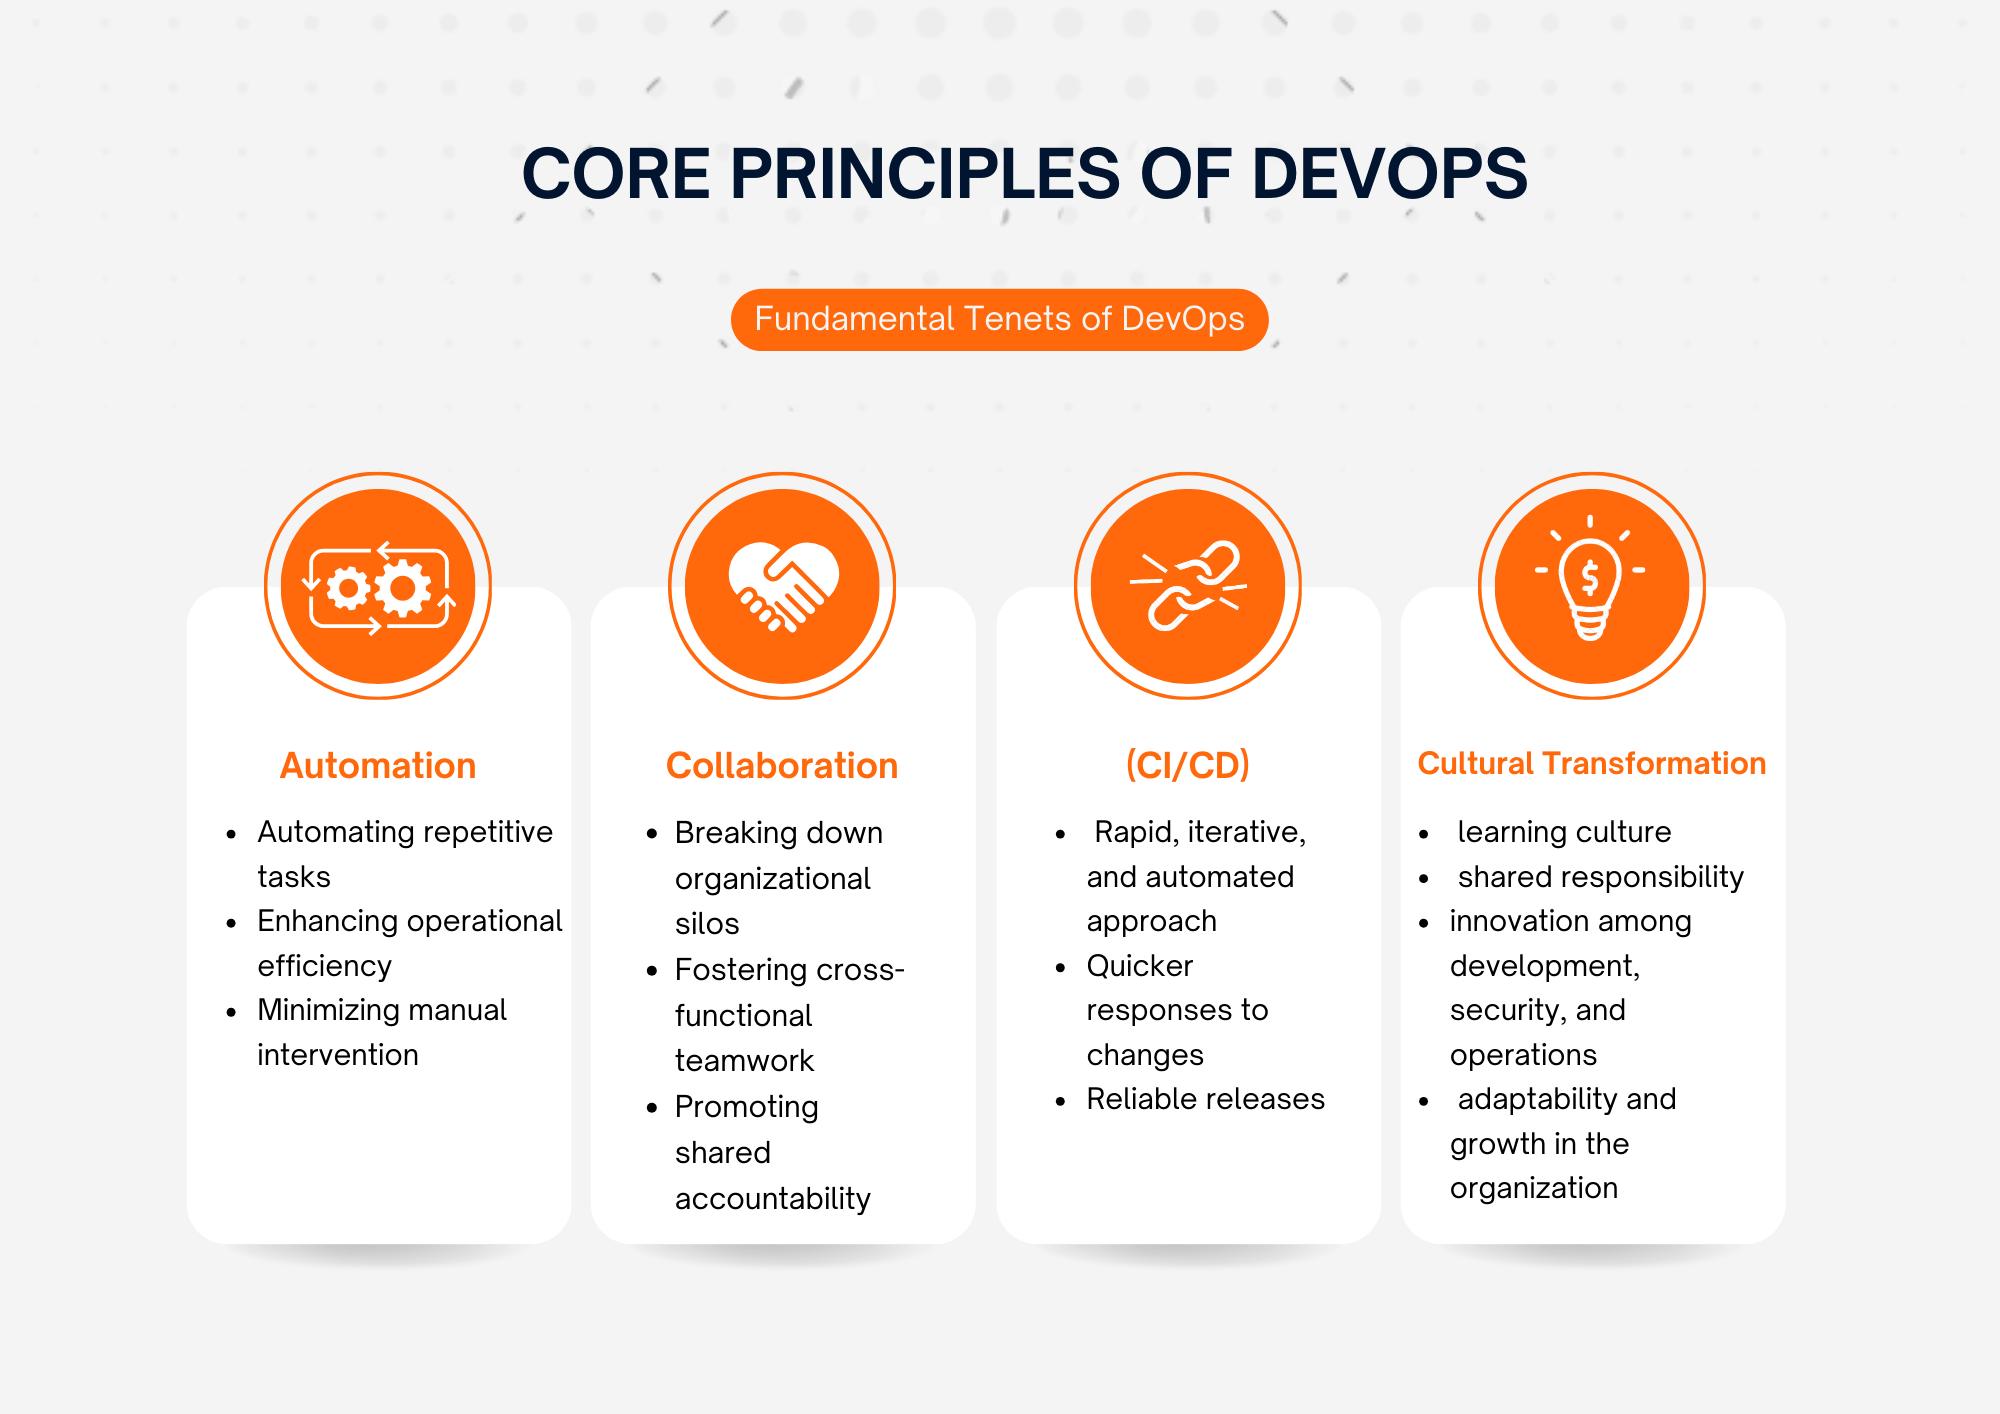 Table illustration summarizing the core principles of DevOps and their associated benefits.